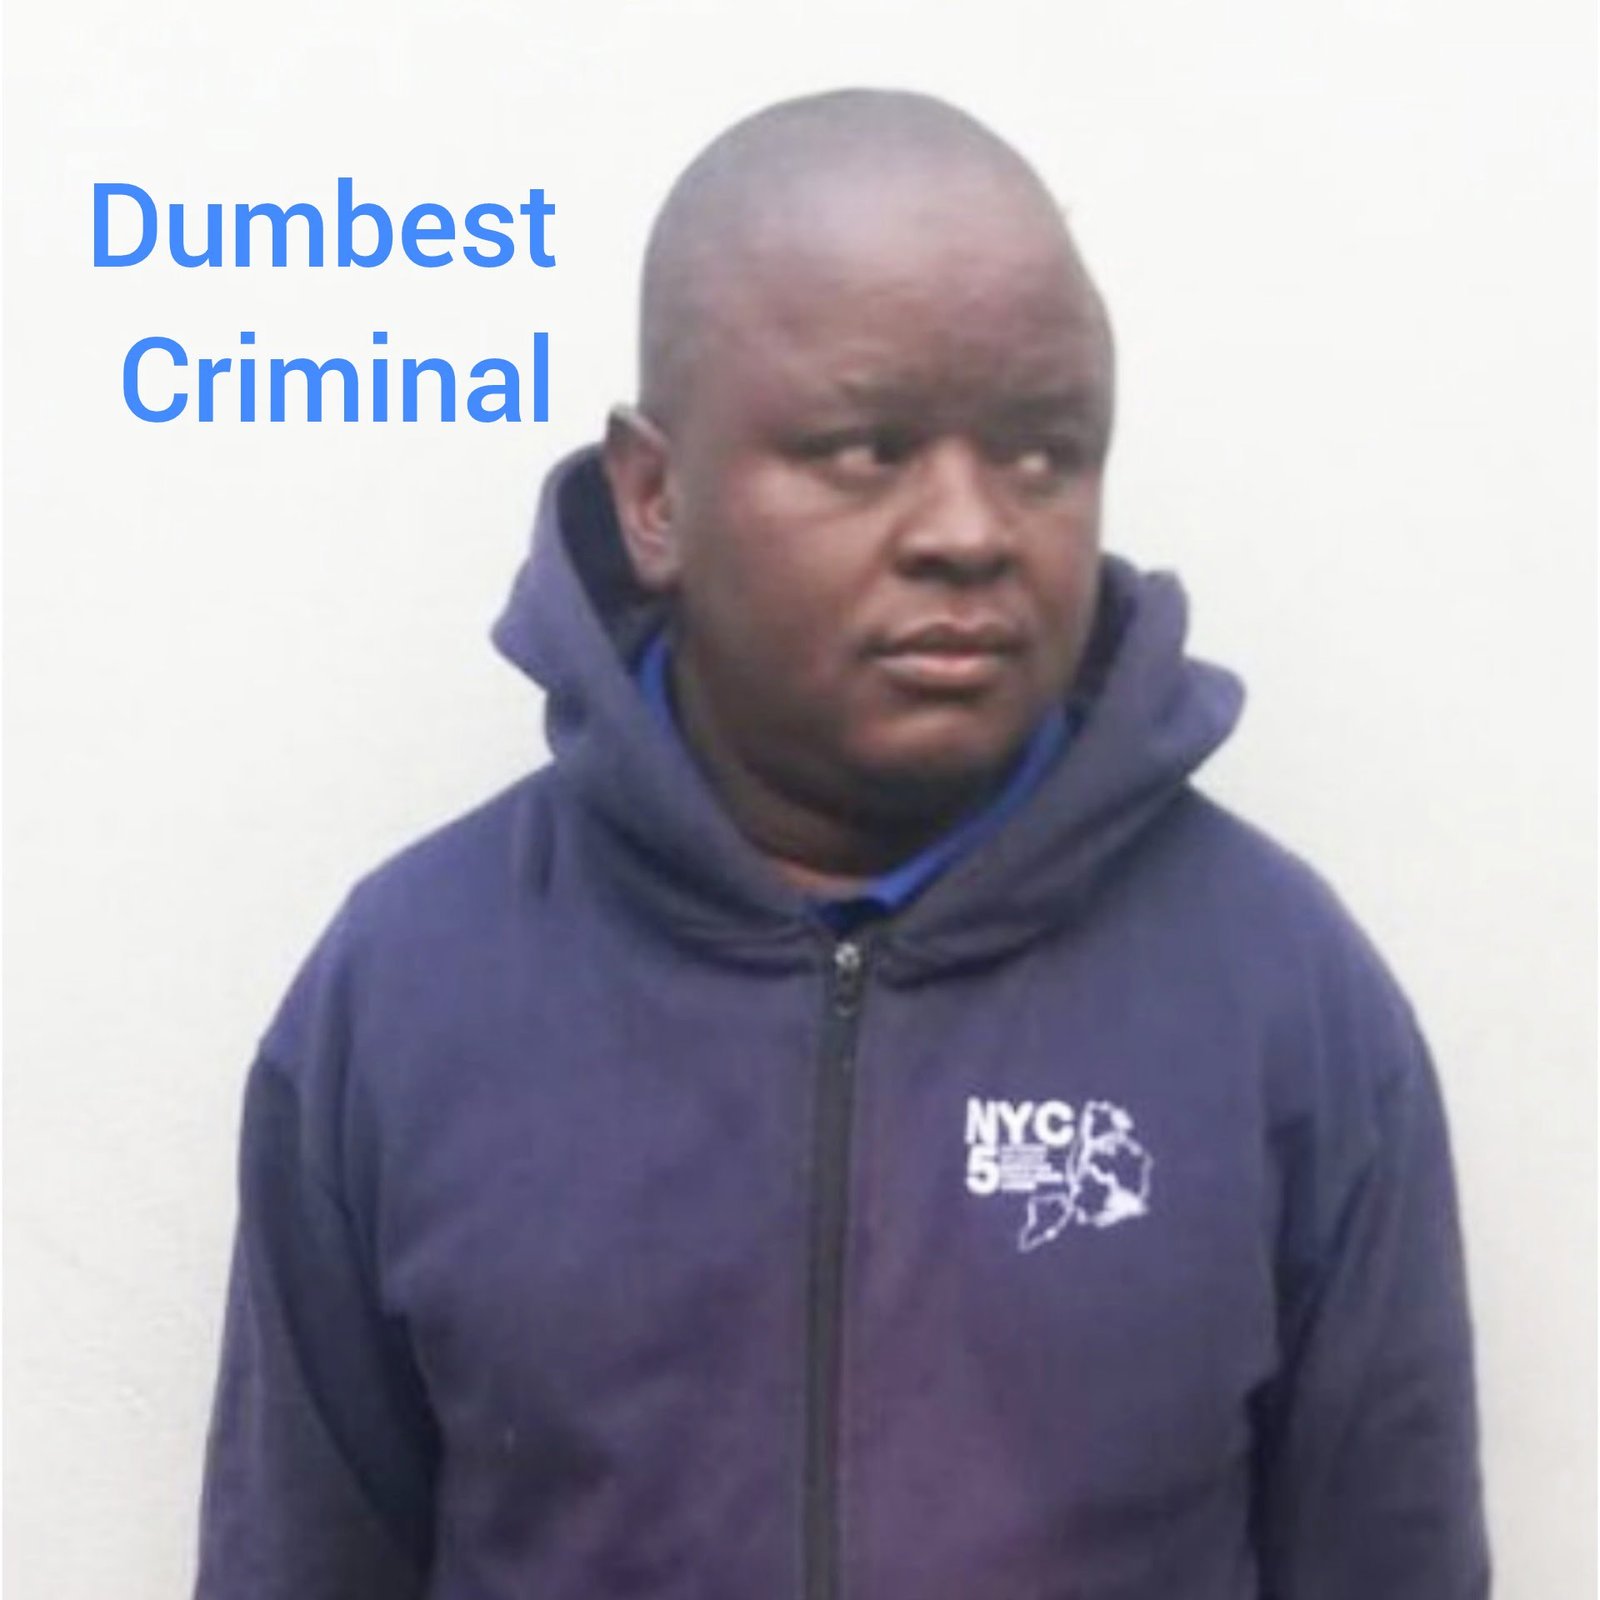 African's Dumbest Criminal: A Criminal Who Has Been On The Run For Years is Caught After Applying For Police Job